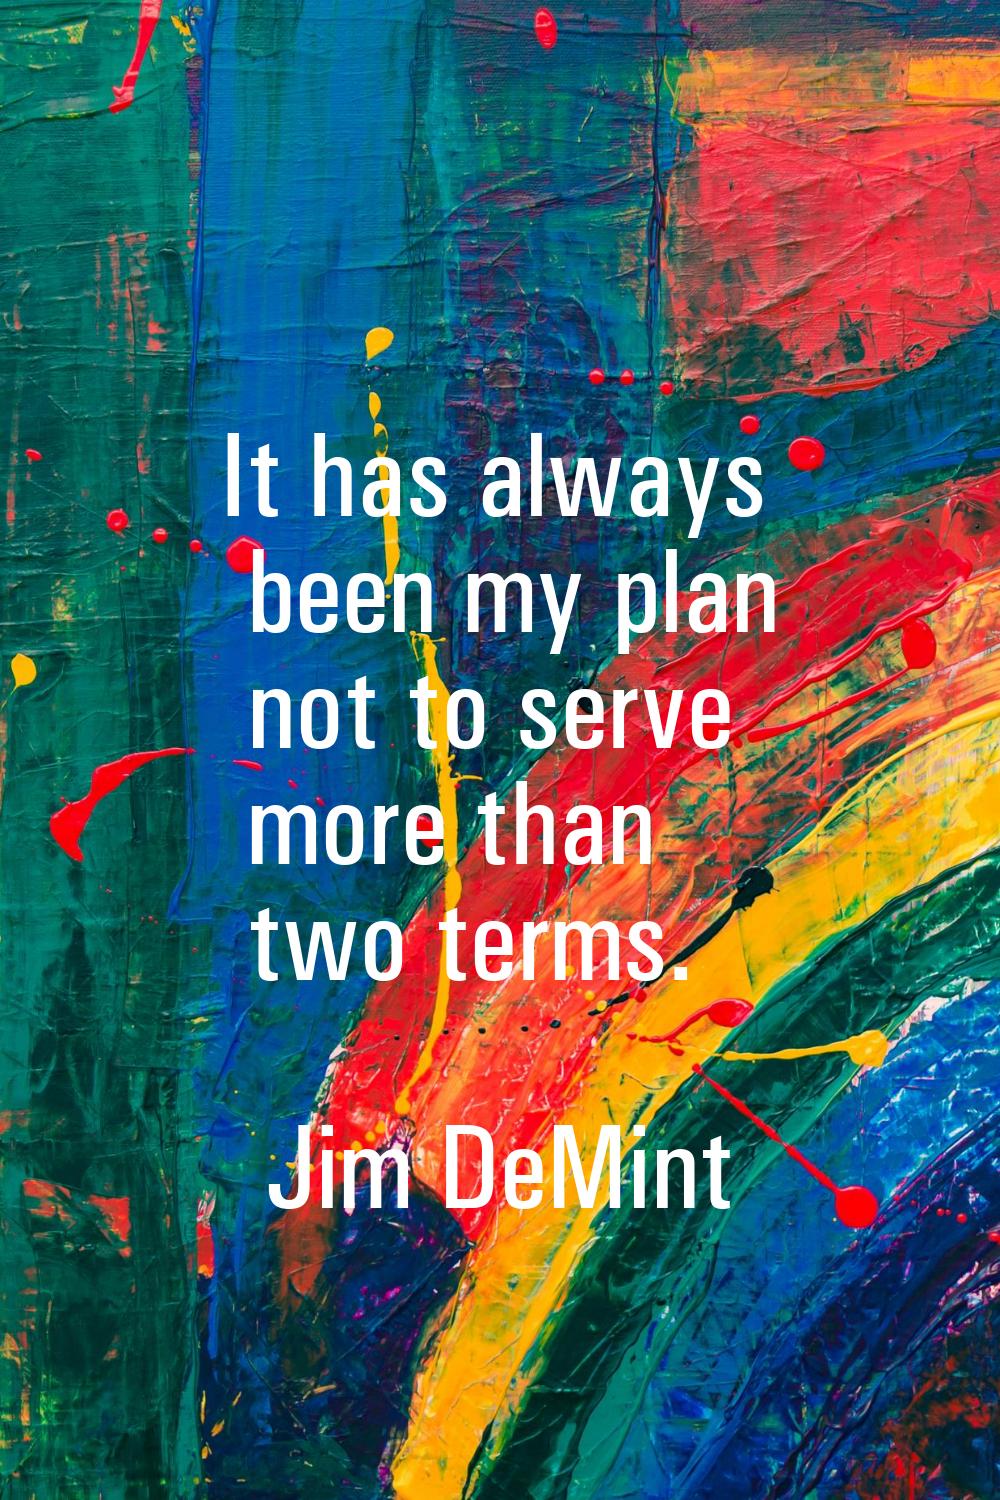 It has always been my plan not to serve more than two terms.